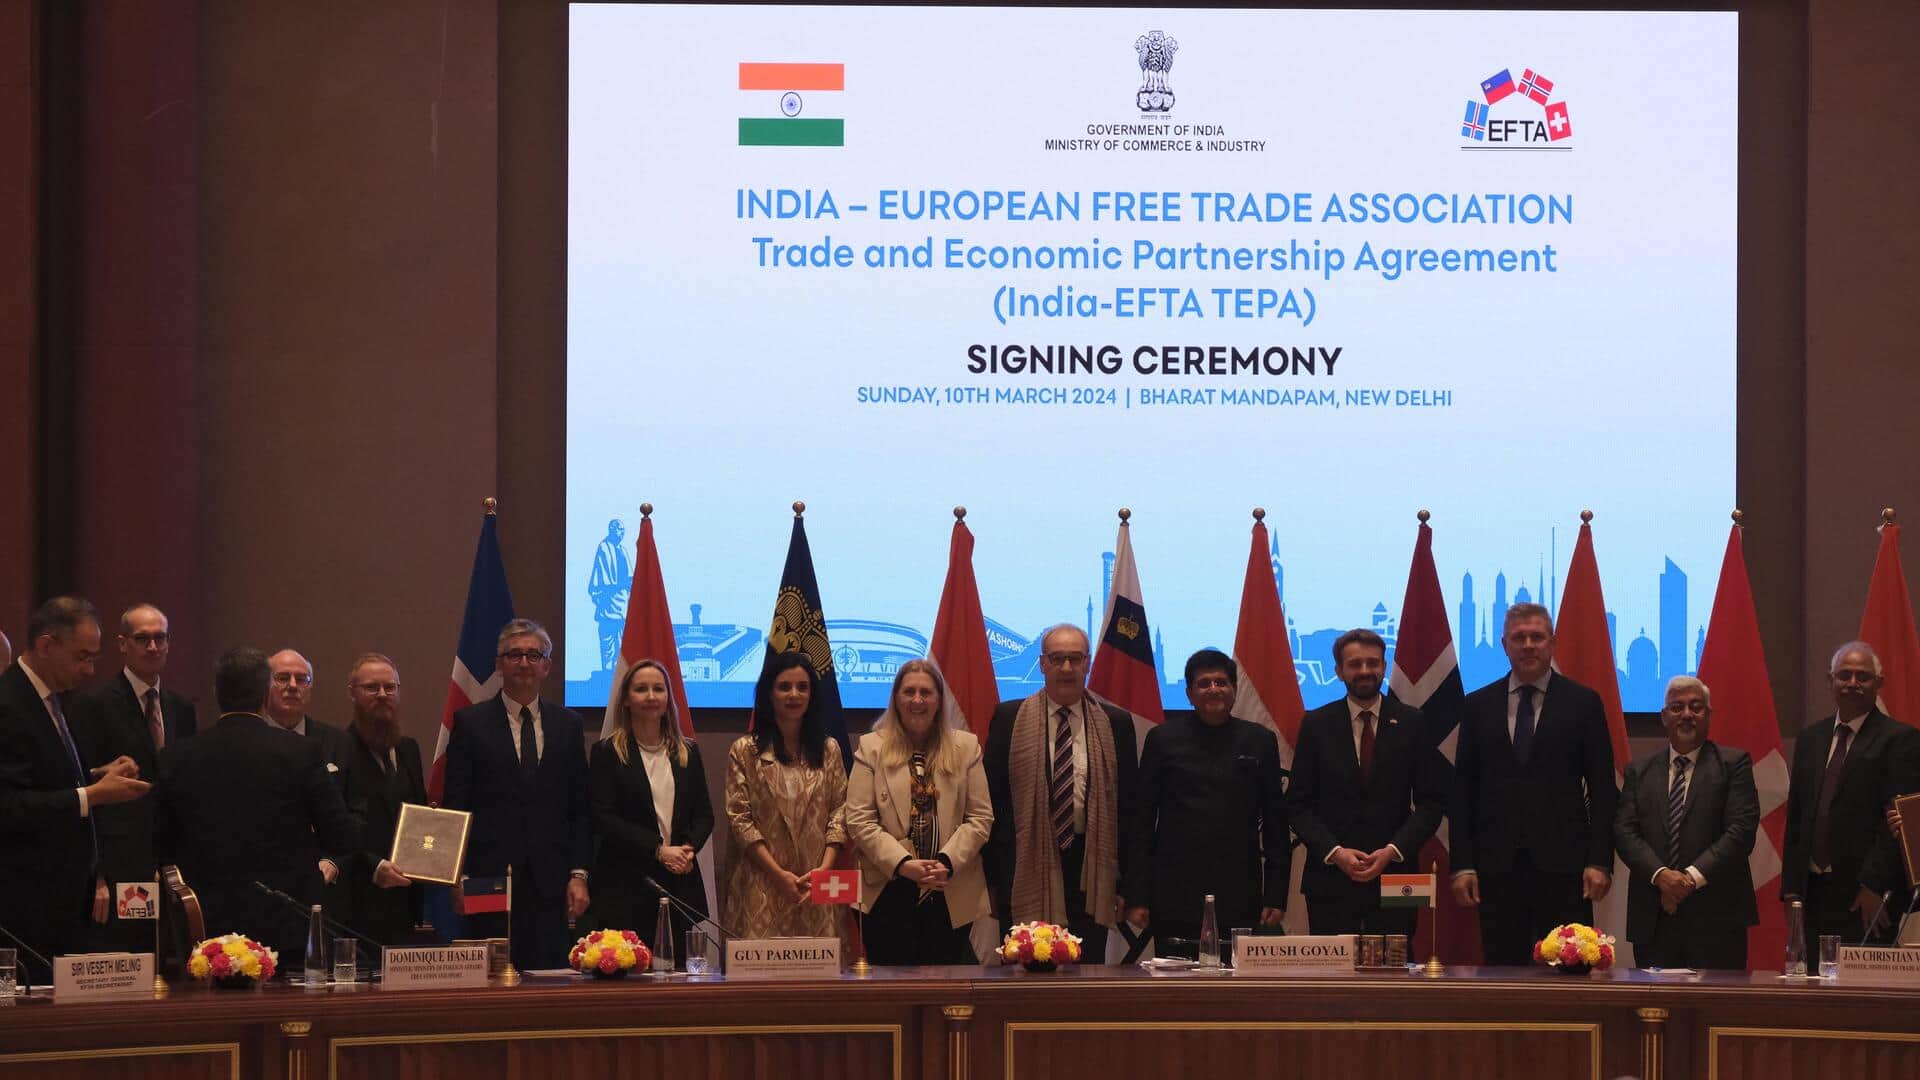 'Watershed moment': PM Modi hails India, EFTA trade agreement